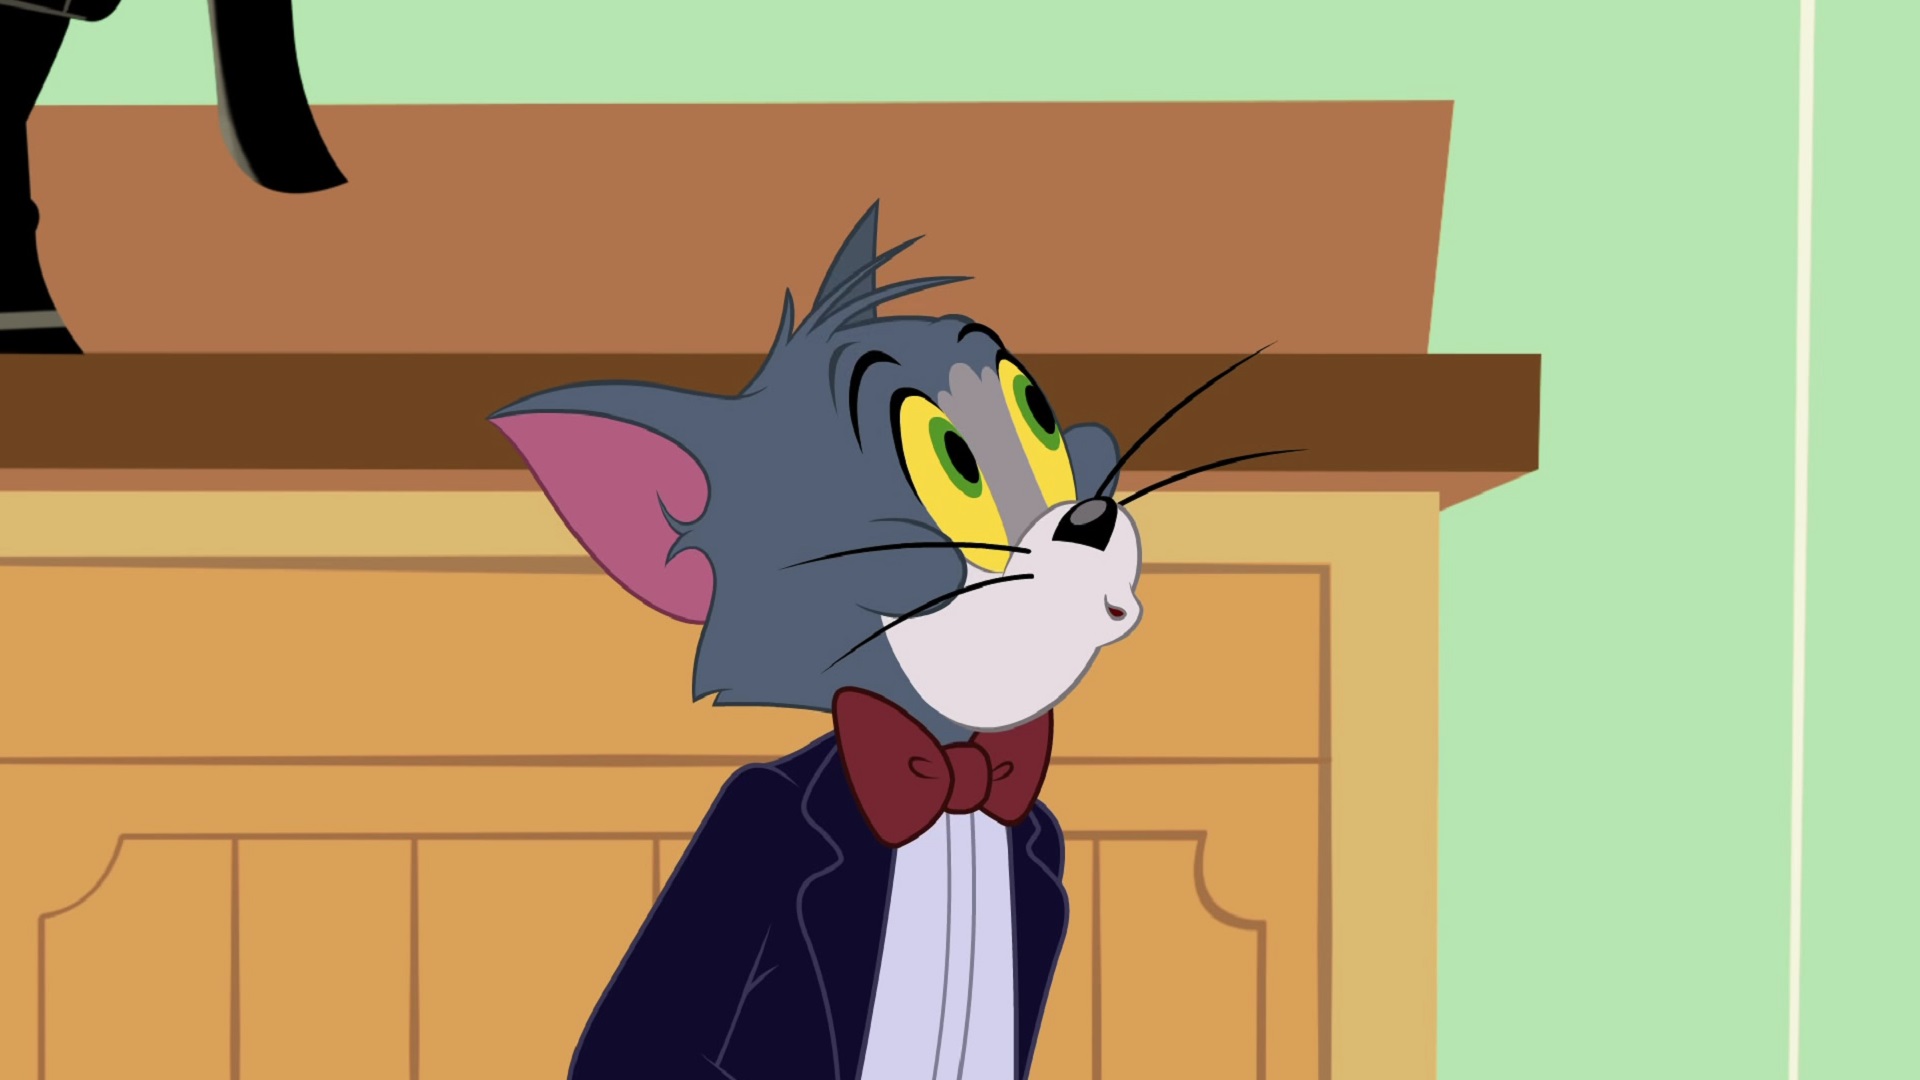 Tom dressed in a tuxedo - Tom and Jerry